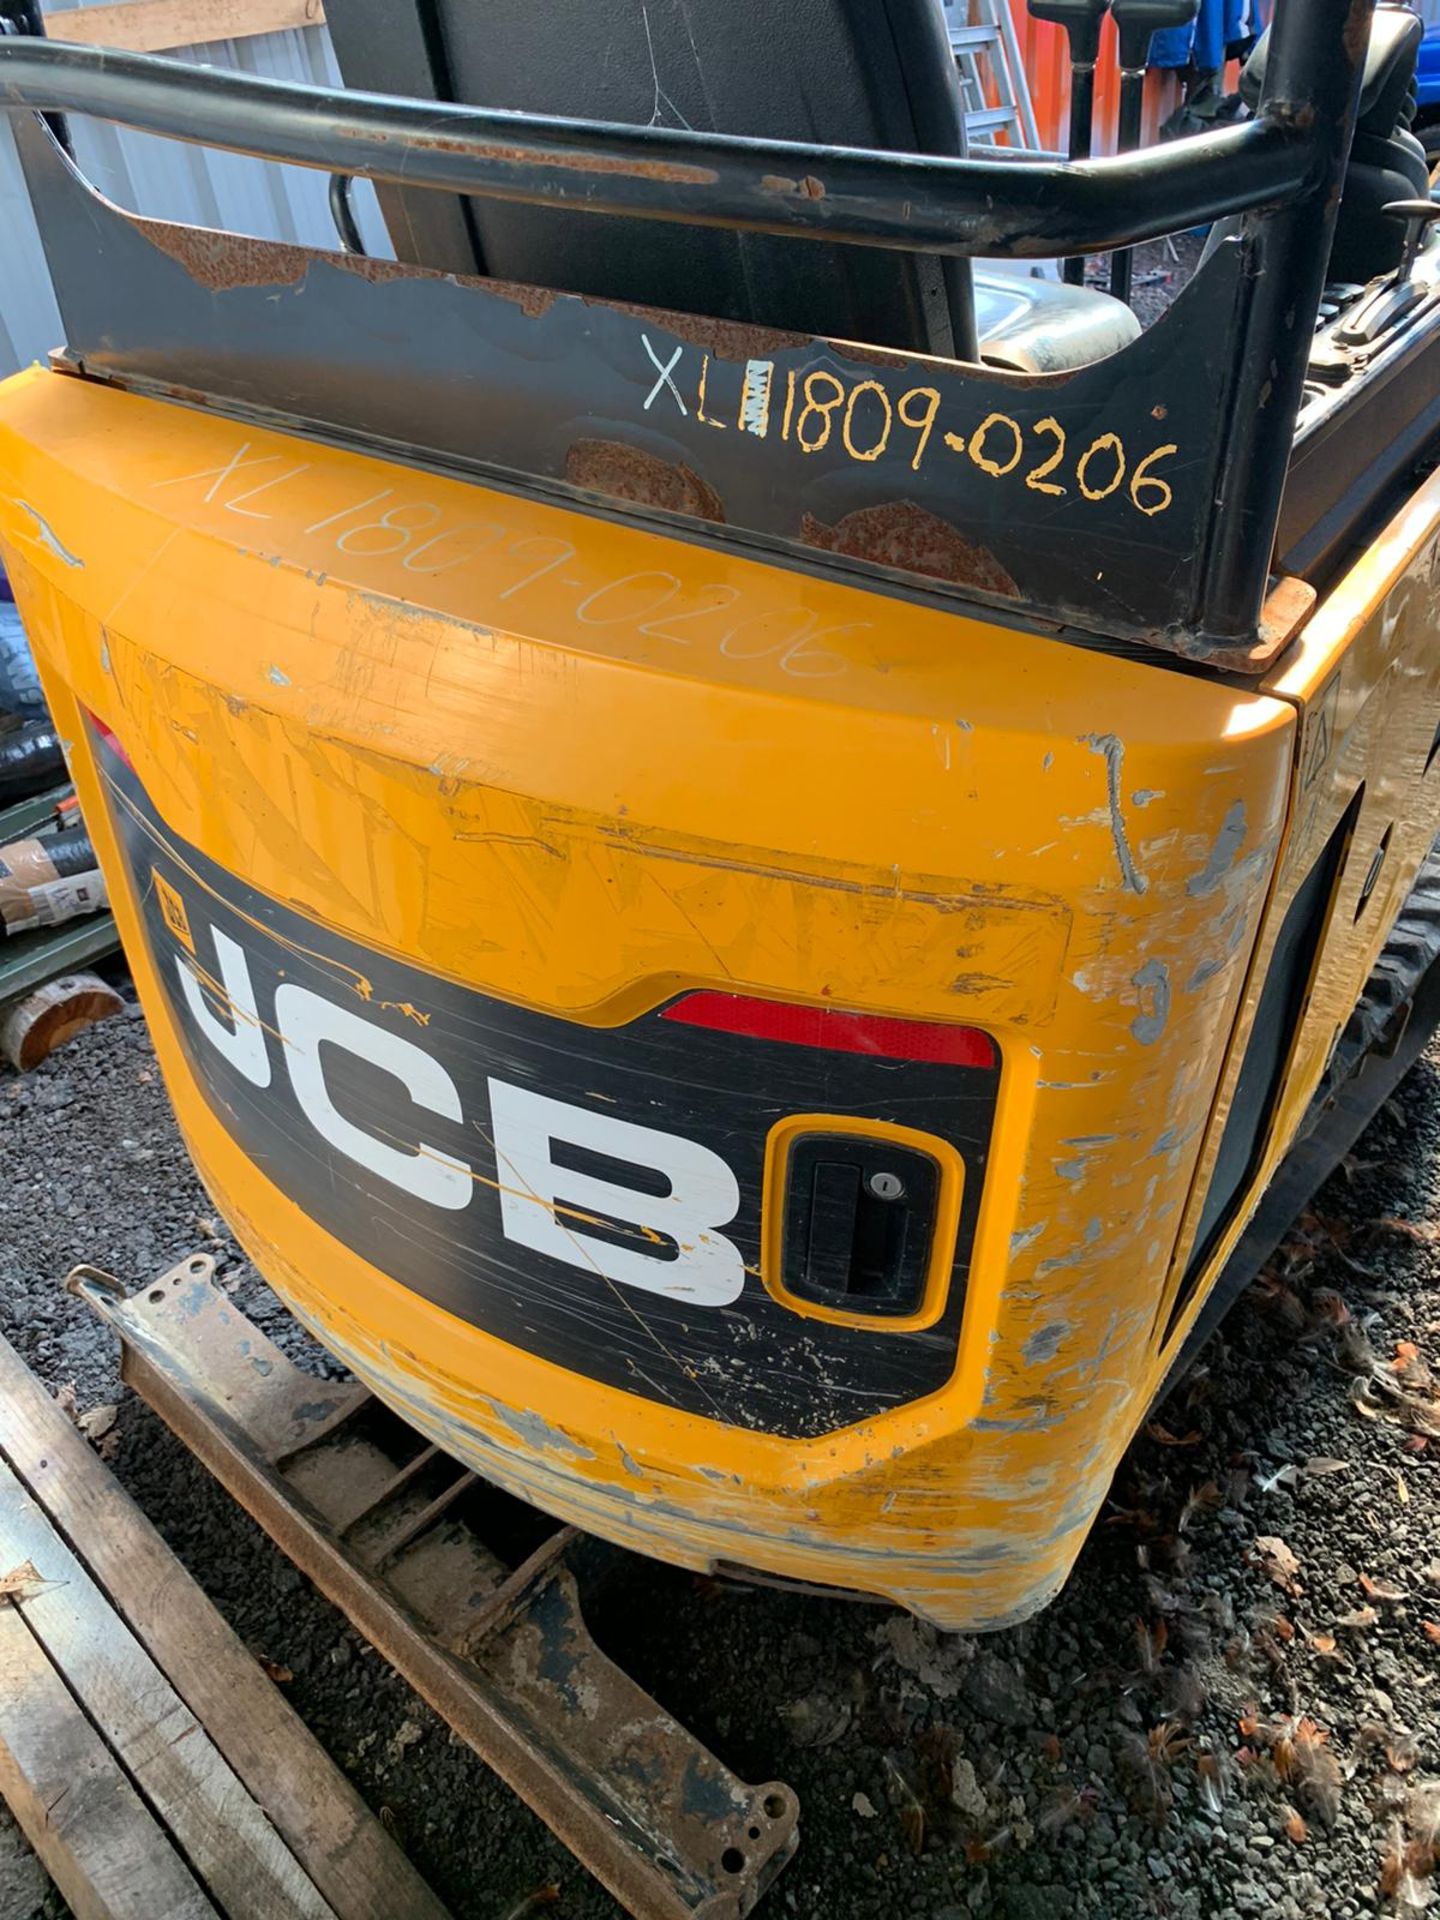 2018 JCB MINI DIGGER: GOOD TRACKS, 2 BUCKETS INCLUDED - Image 3 of 11